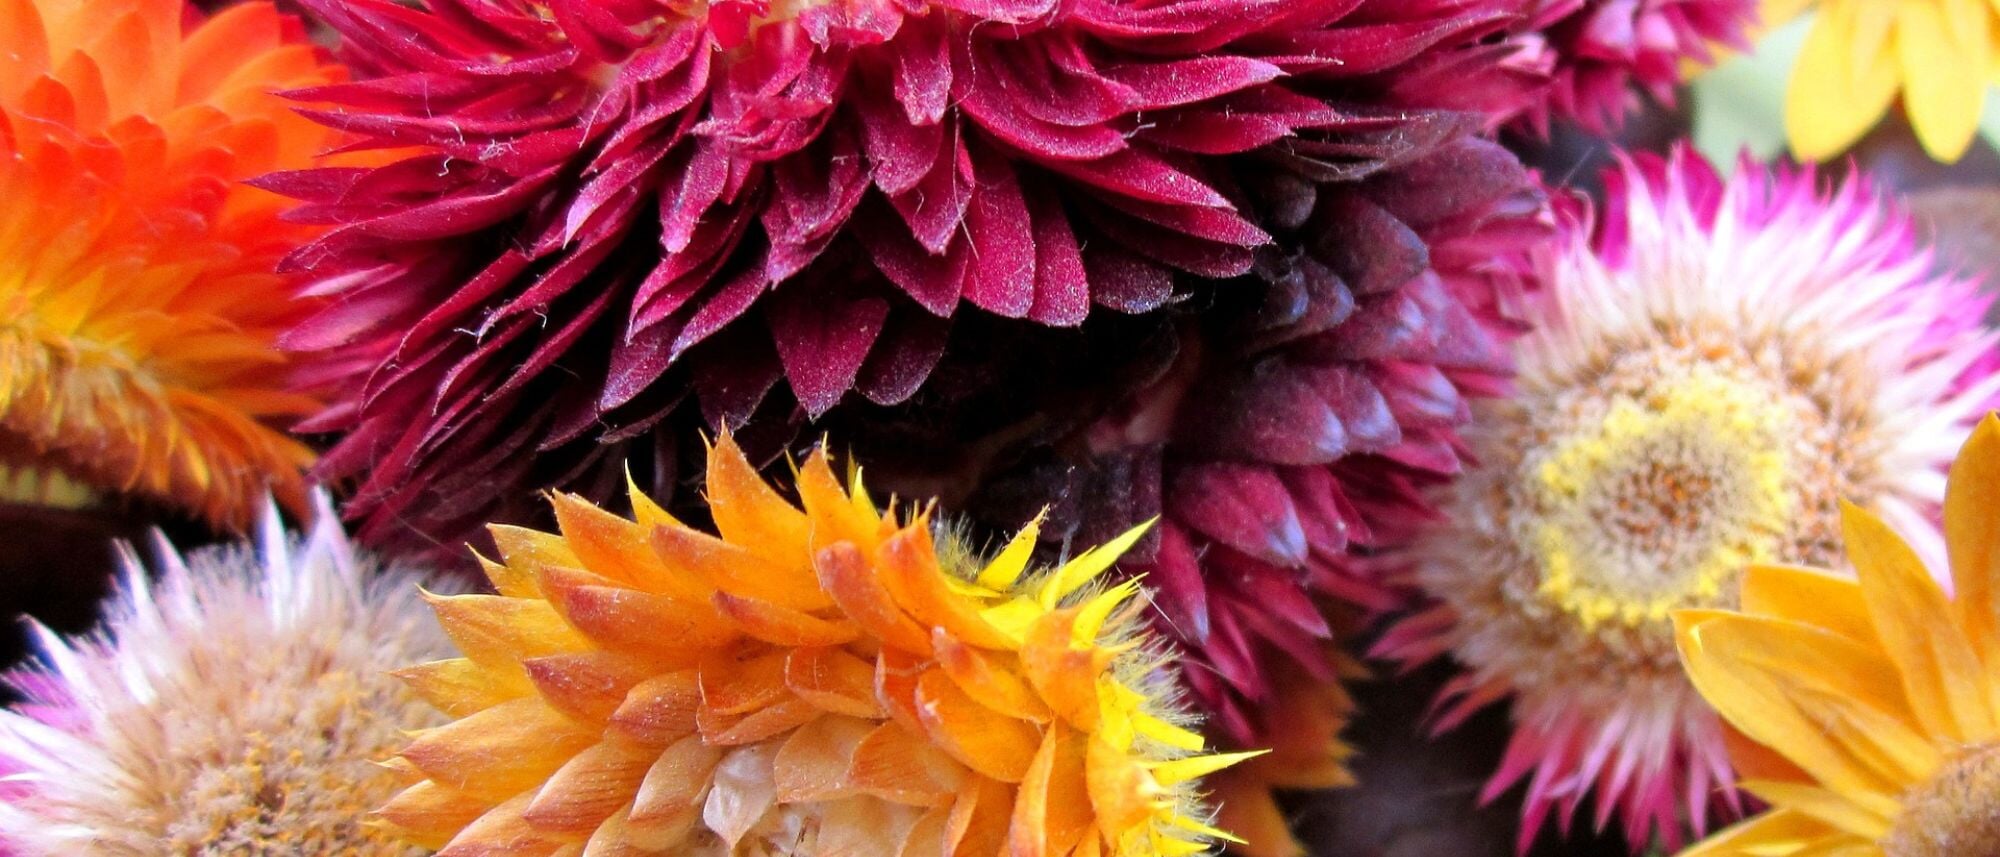 Pink yellow red and light pink strawflowers dried and ready to use